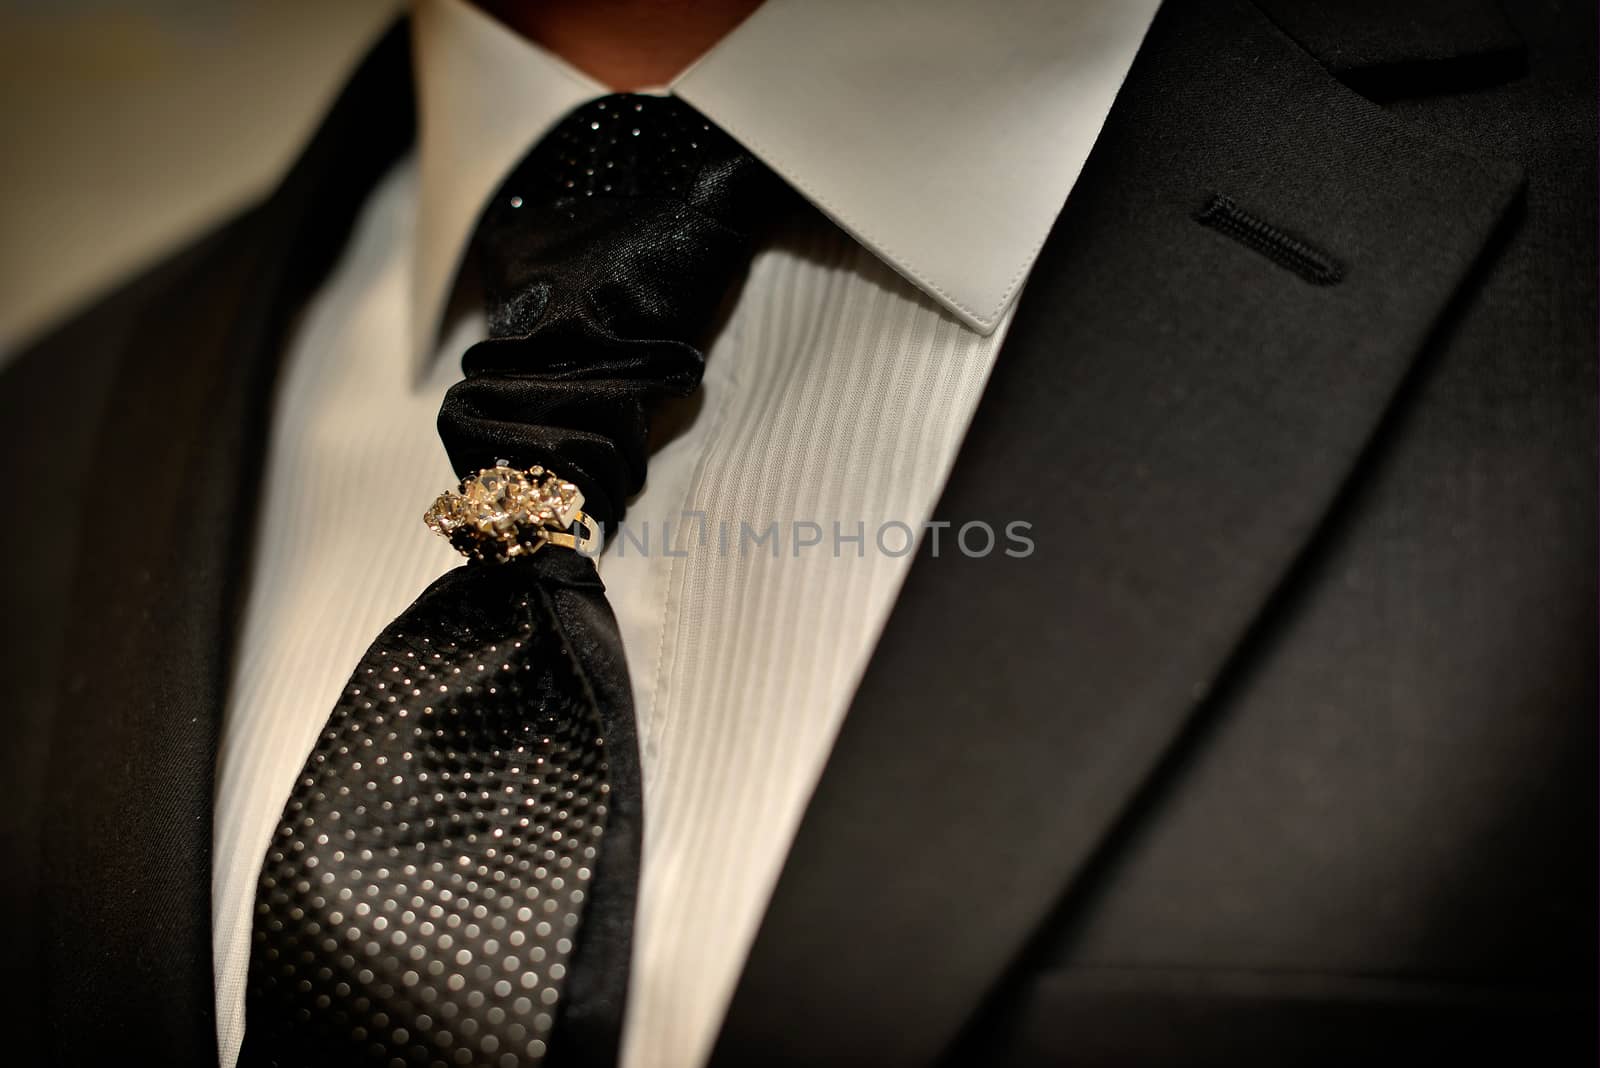 Expensive suit. Classically tie and luxury tie clip for respectable men